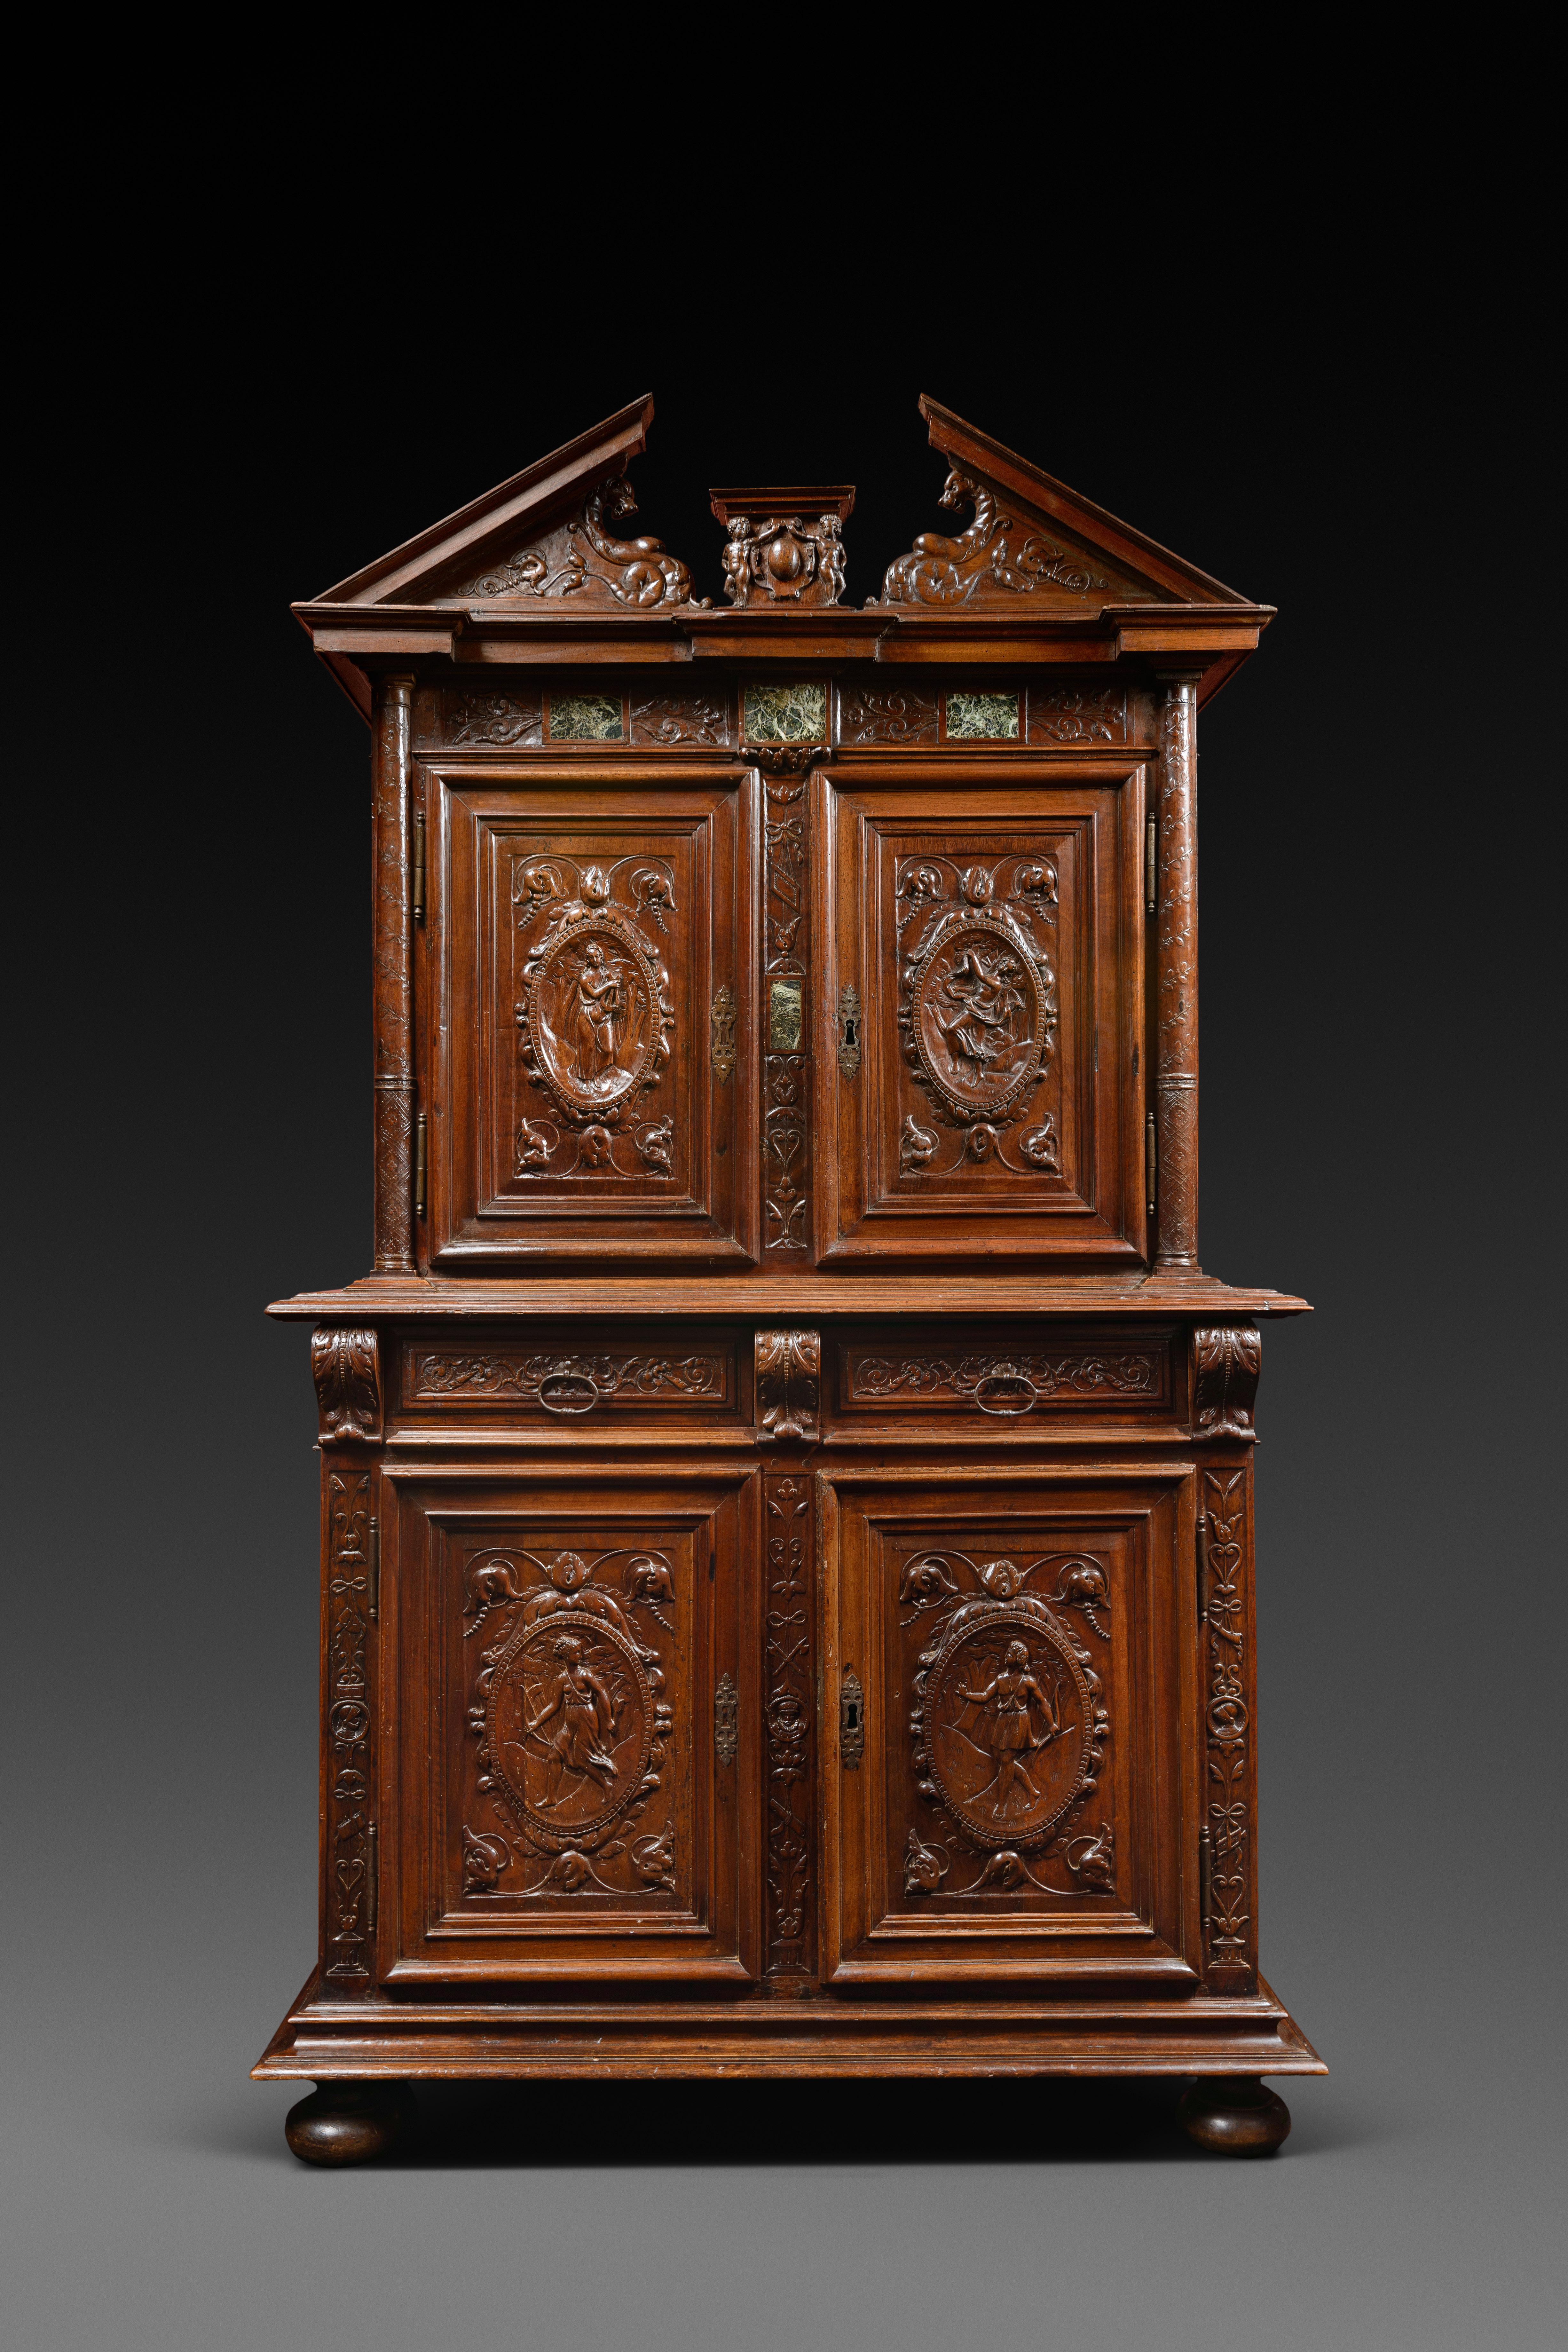 On the left post of the lower body, is written the date 1596 in a cartouche

This cabinet has two bodies. The upper part, set back, is moulded and carved. At the bottom, the cabinet opens with two doors surmounted by two drawers, and at the top by